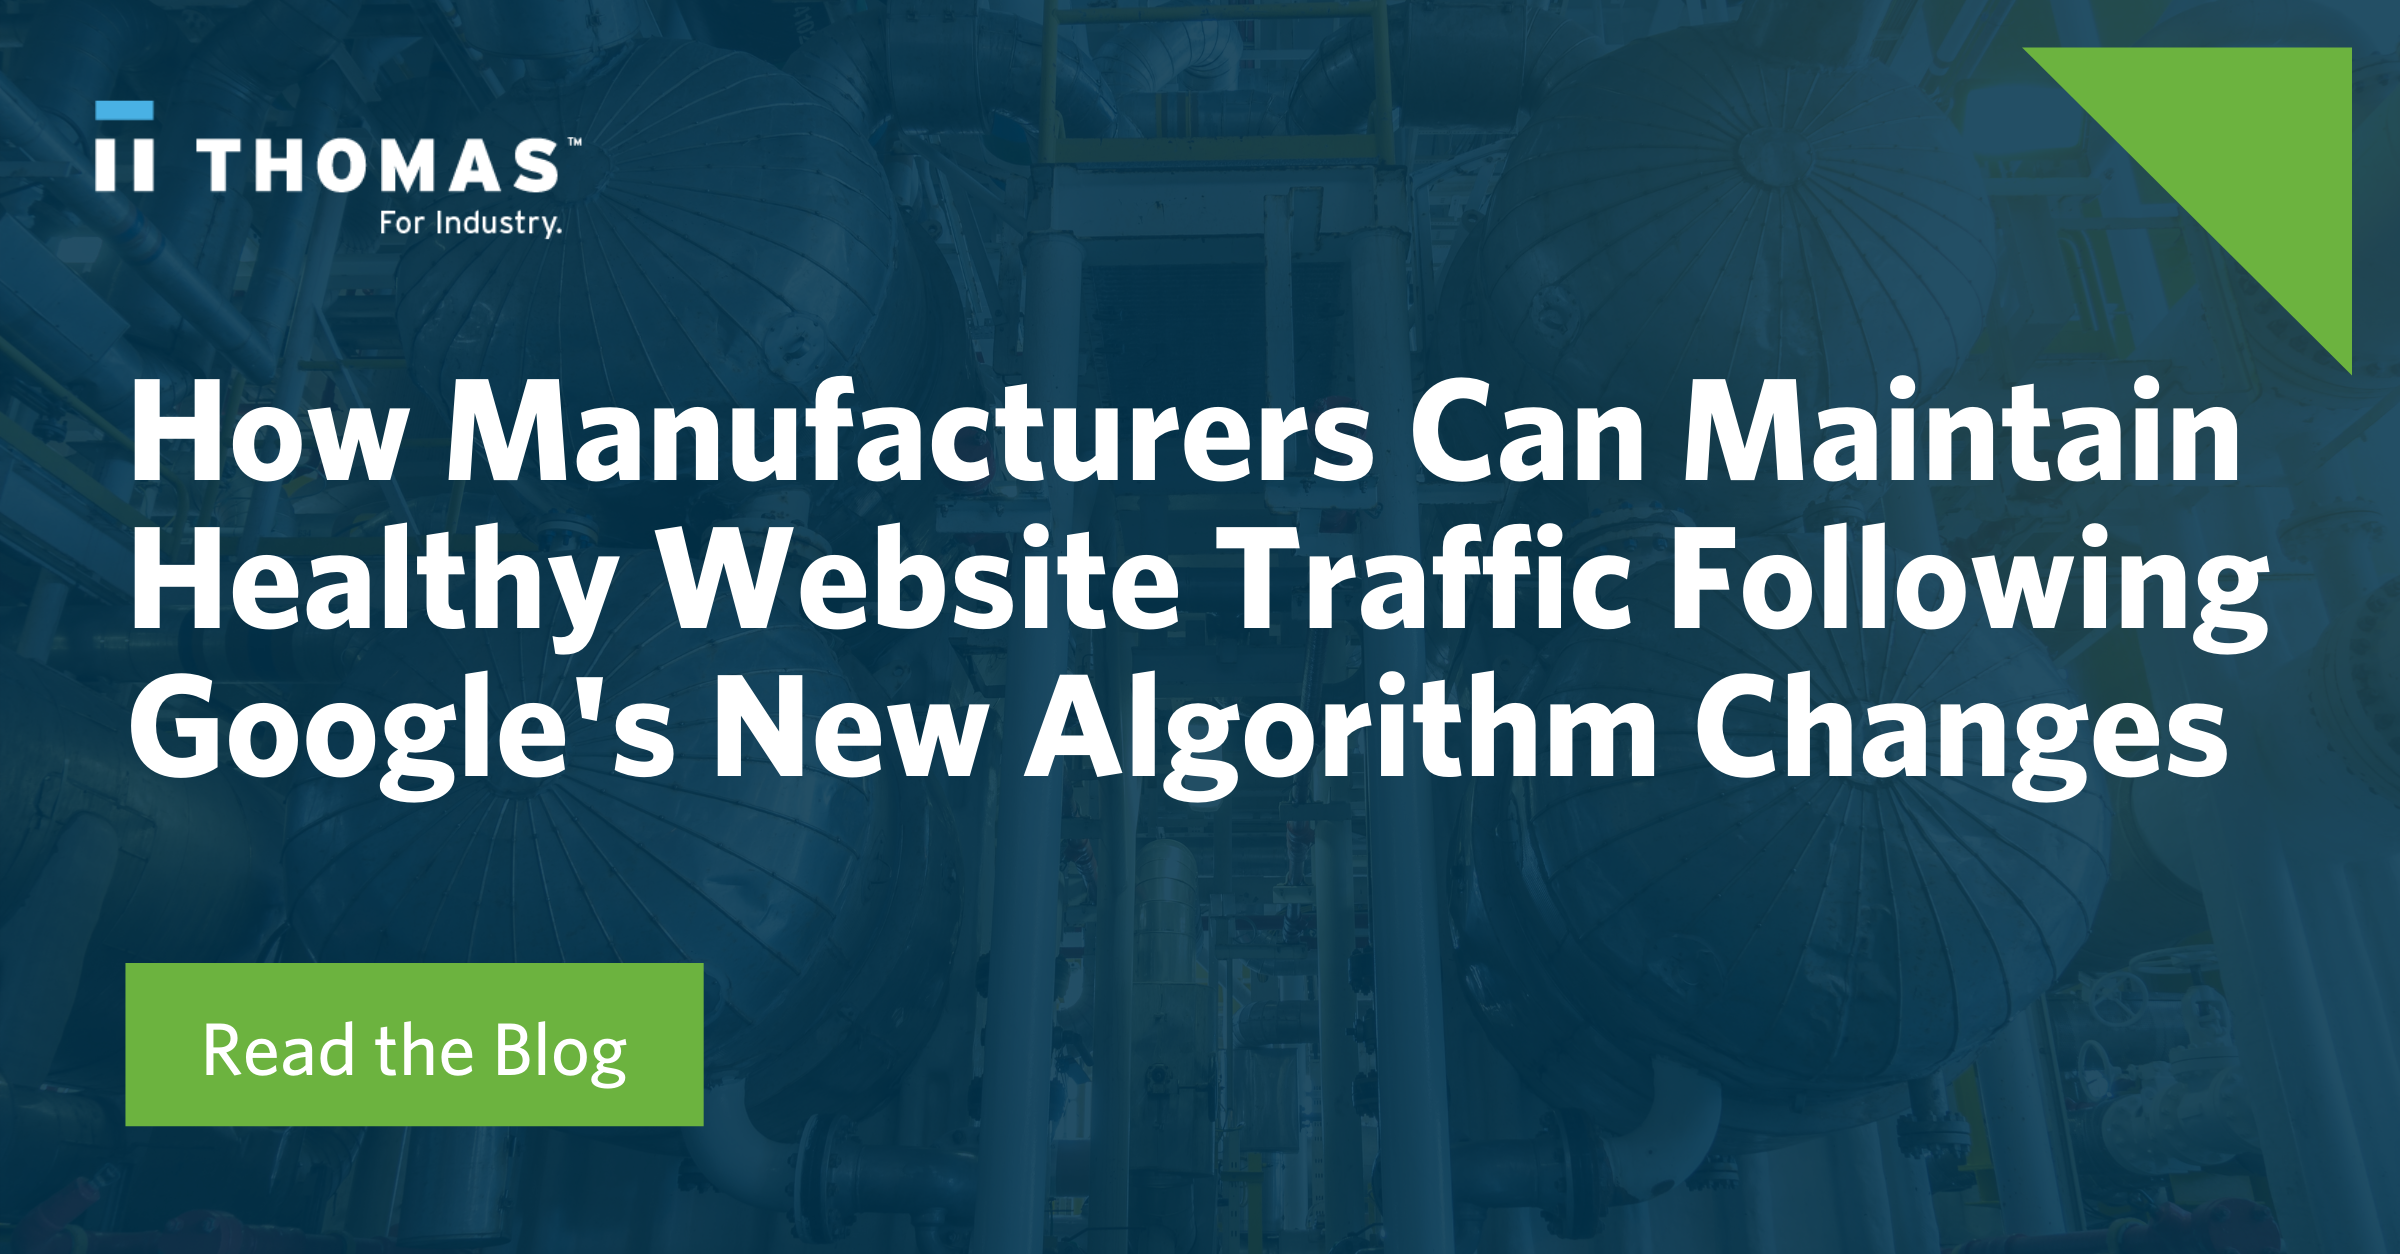 How Manufacturers Can Maintain Healthy Website Traffic Following Google's New Algorithm Changes